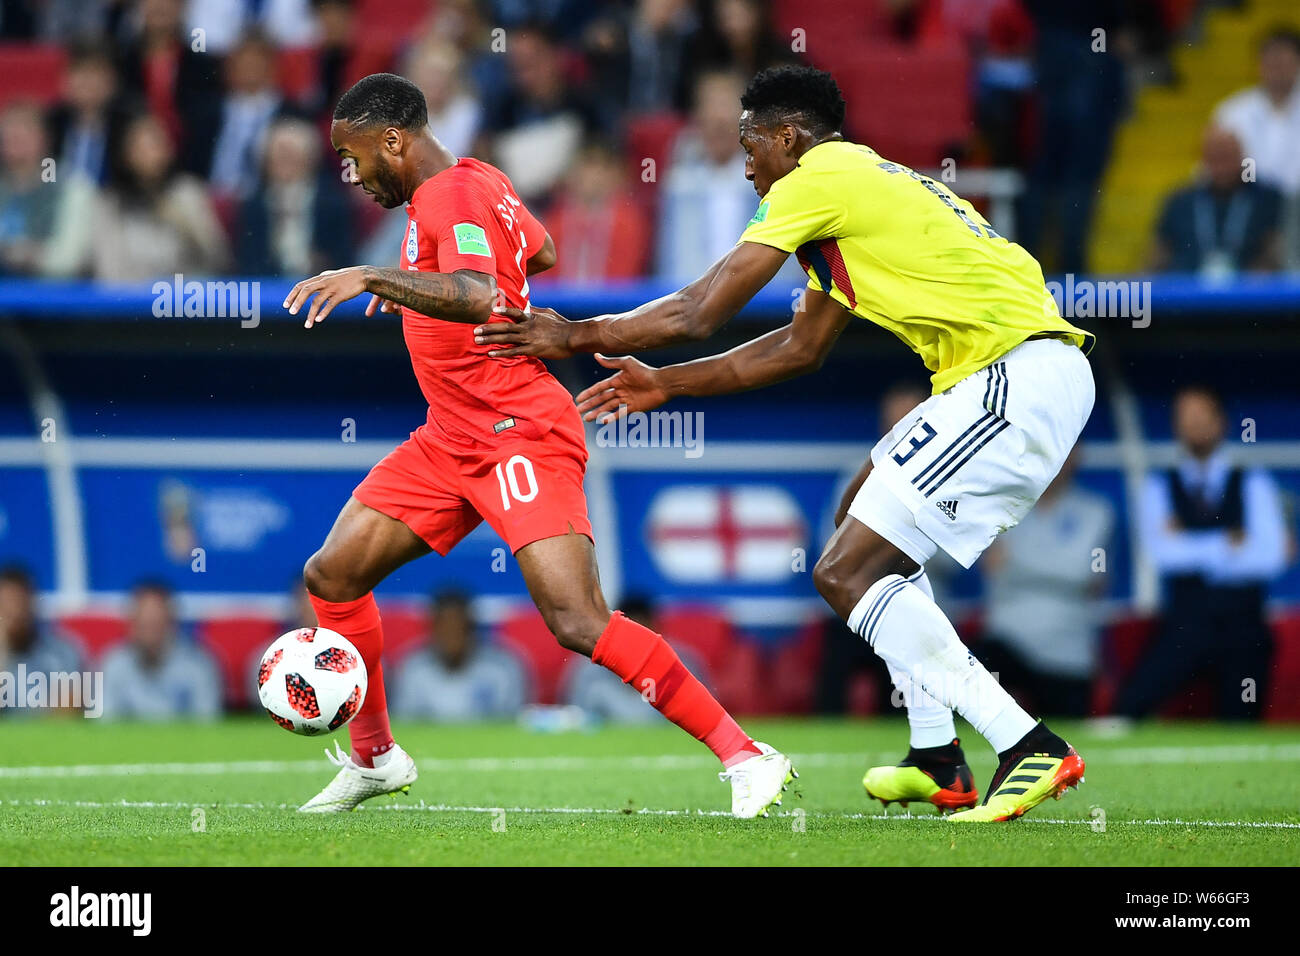 Yerry Mina of Columbia, right, challenges Raheem Sterling of England in their Round of 16 match during the 2018 FIFA World Cup in Moscow, Russia, 3 Ju Stock Photo